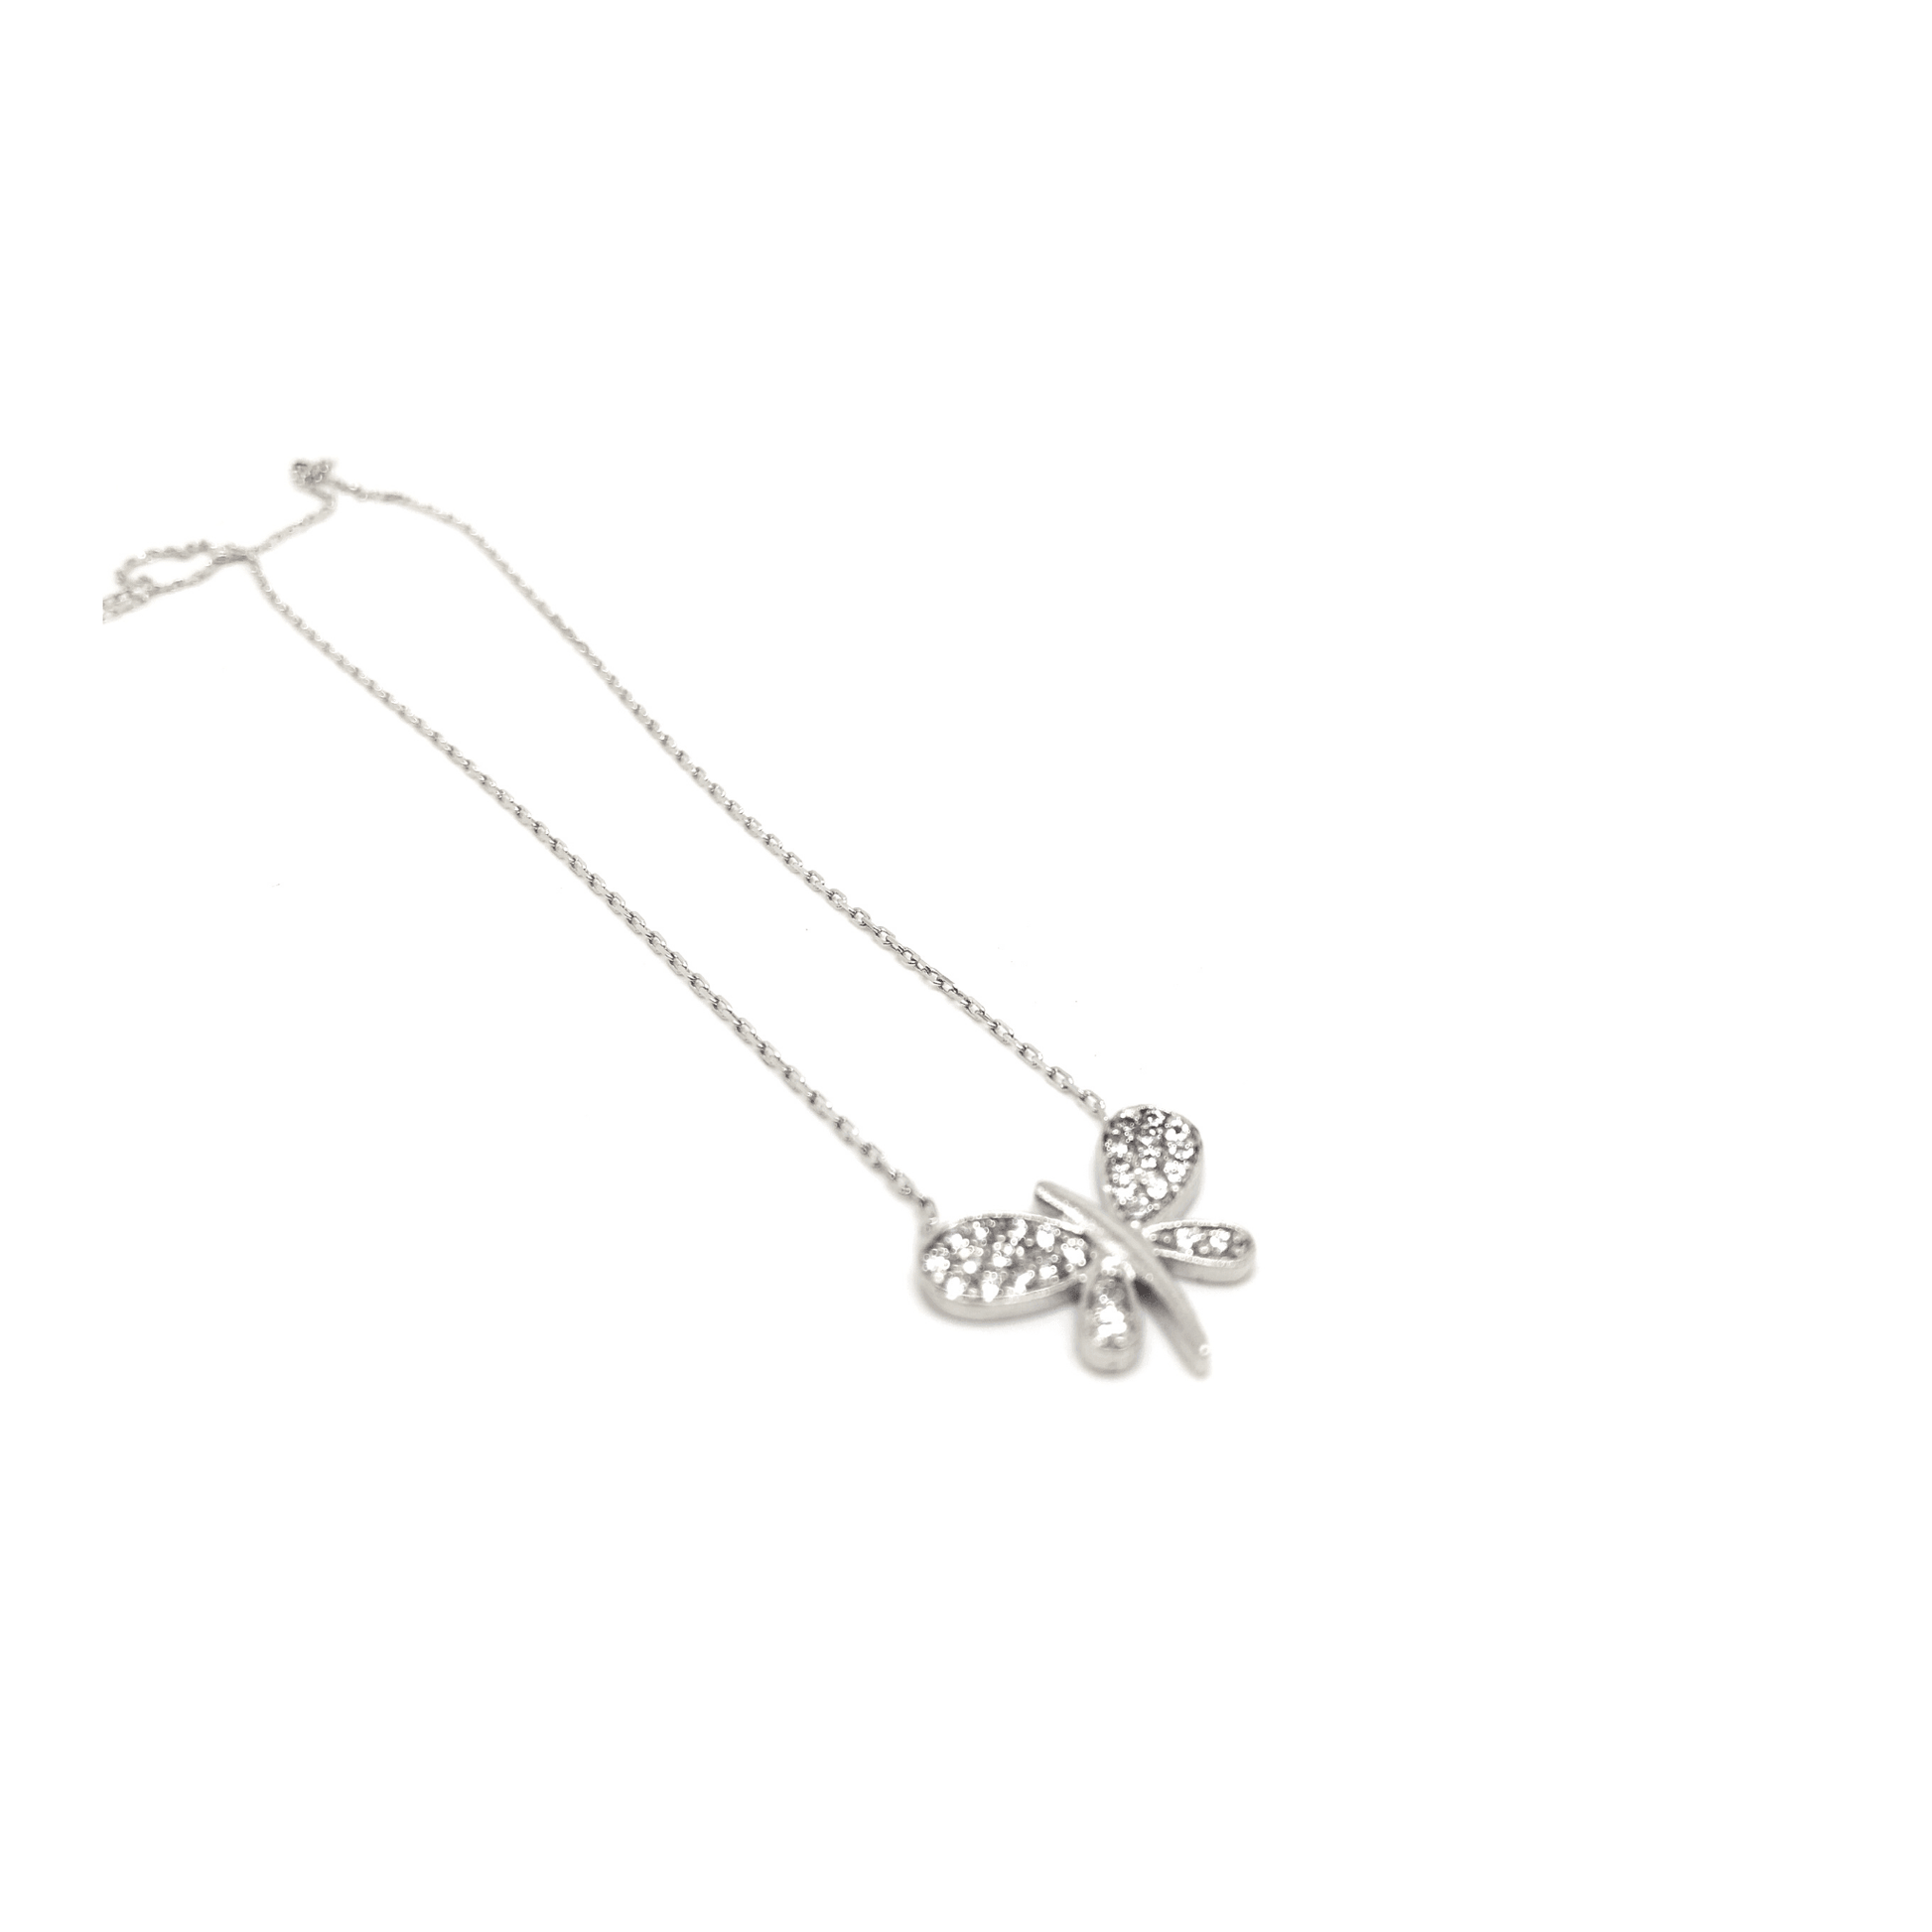 Dainty Silver Necklace for Woman, Dragonfly Necklace, 925 Sterling Silver Necklace - Naked Nation UK